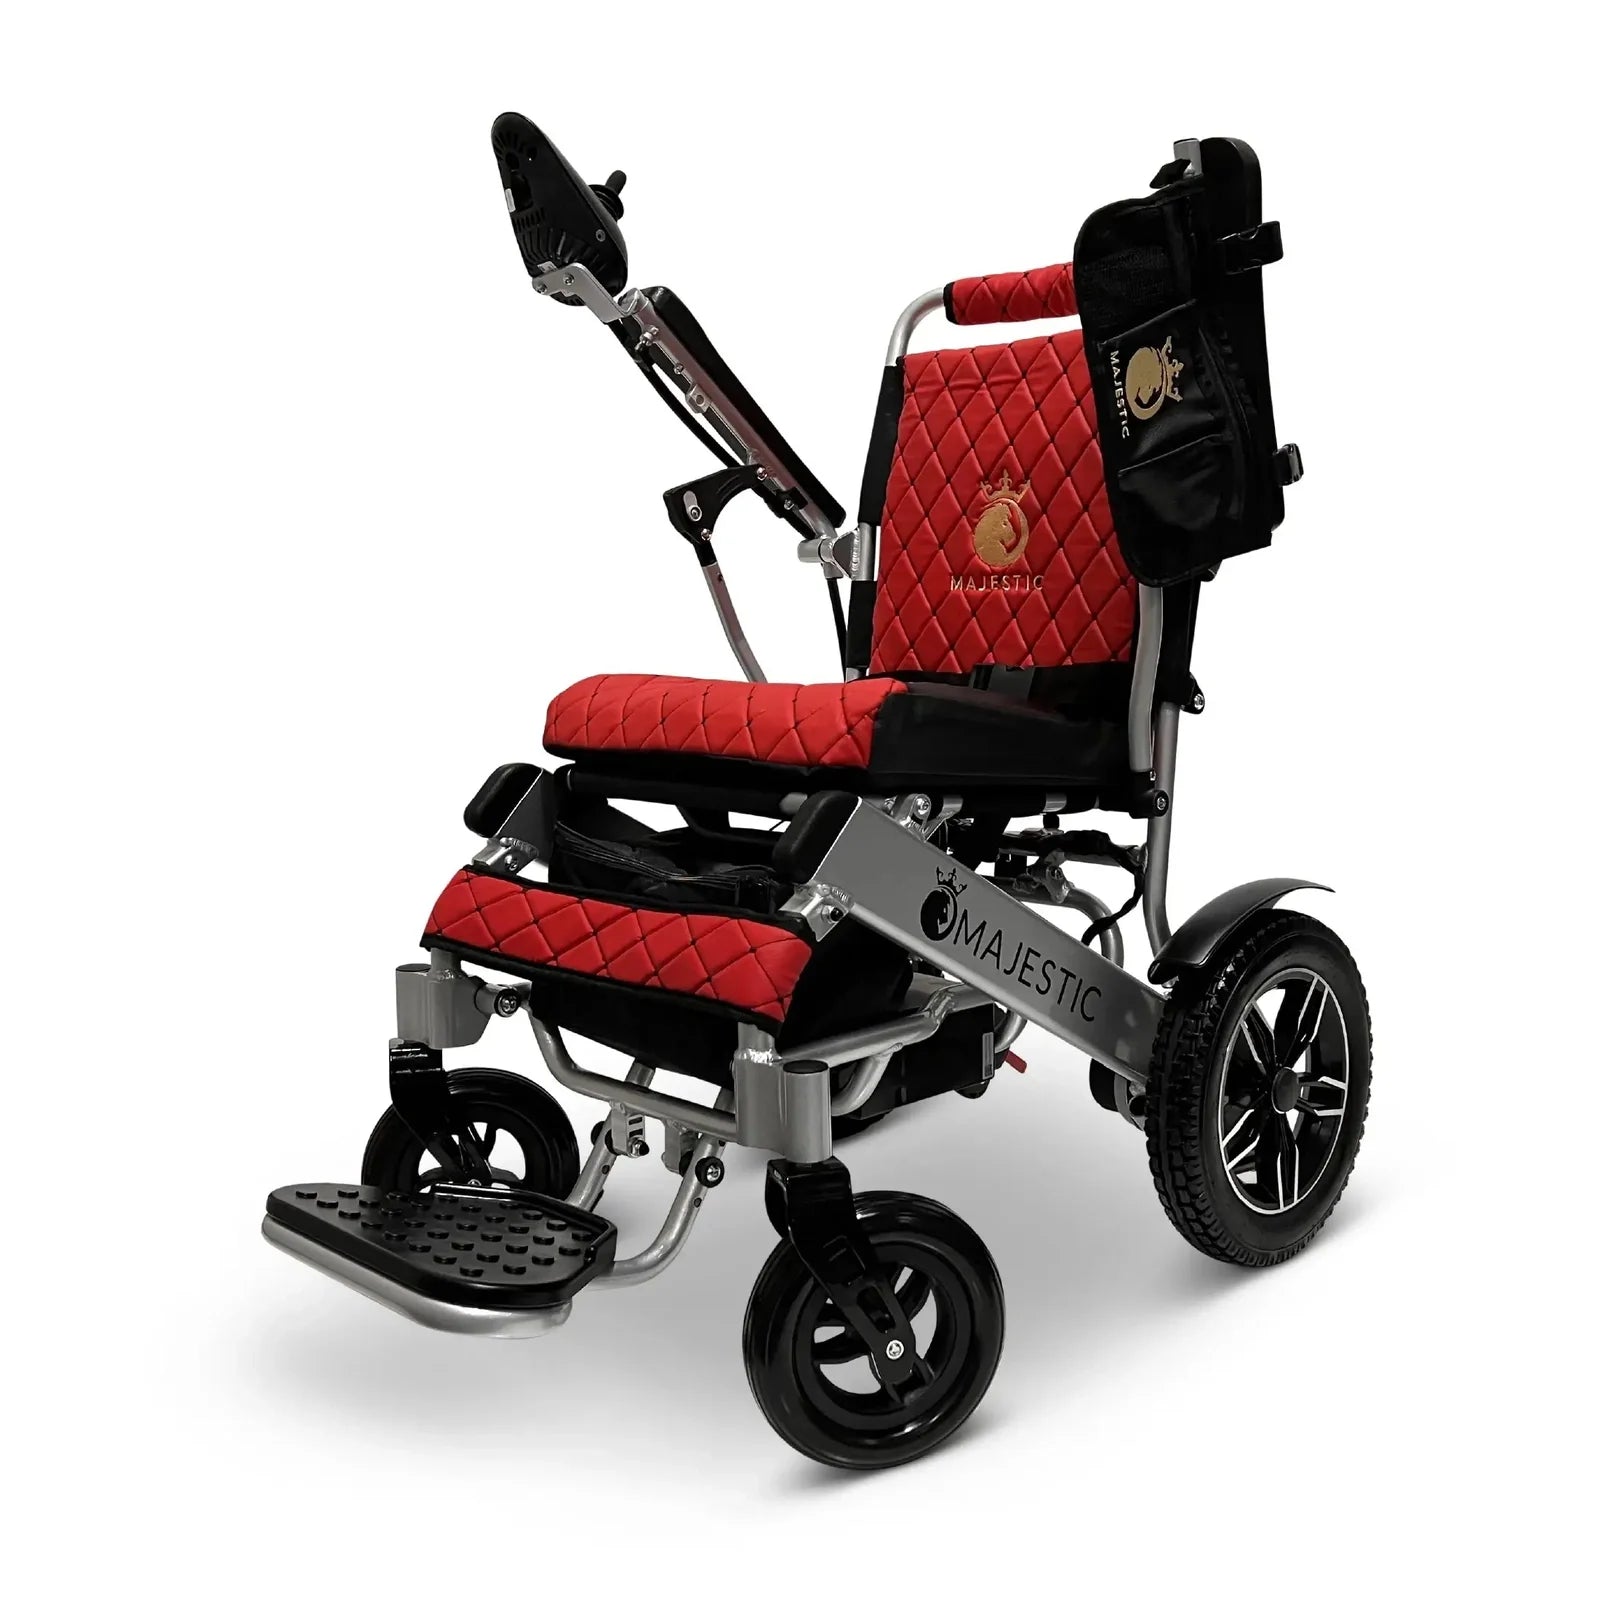 ComfyGO Majestic IQ-8000 Remote Controlled Lightweight Folding Electric Wheelchair Power Wheelchairs ComfyGO Silver Red 10 Miles & 17.5" Seat Width